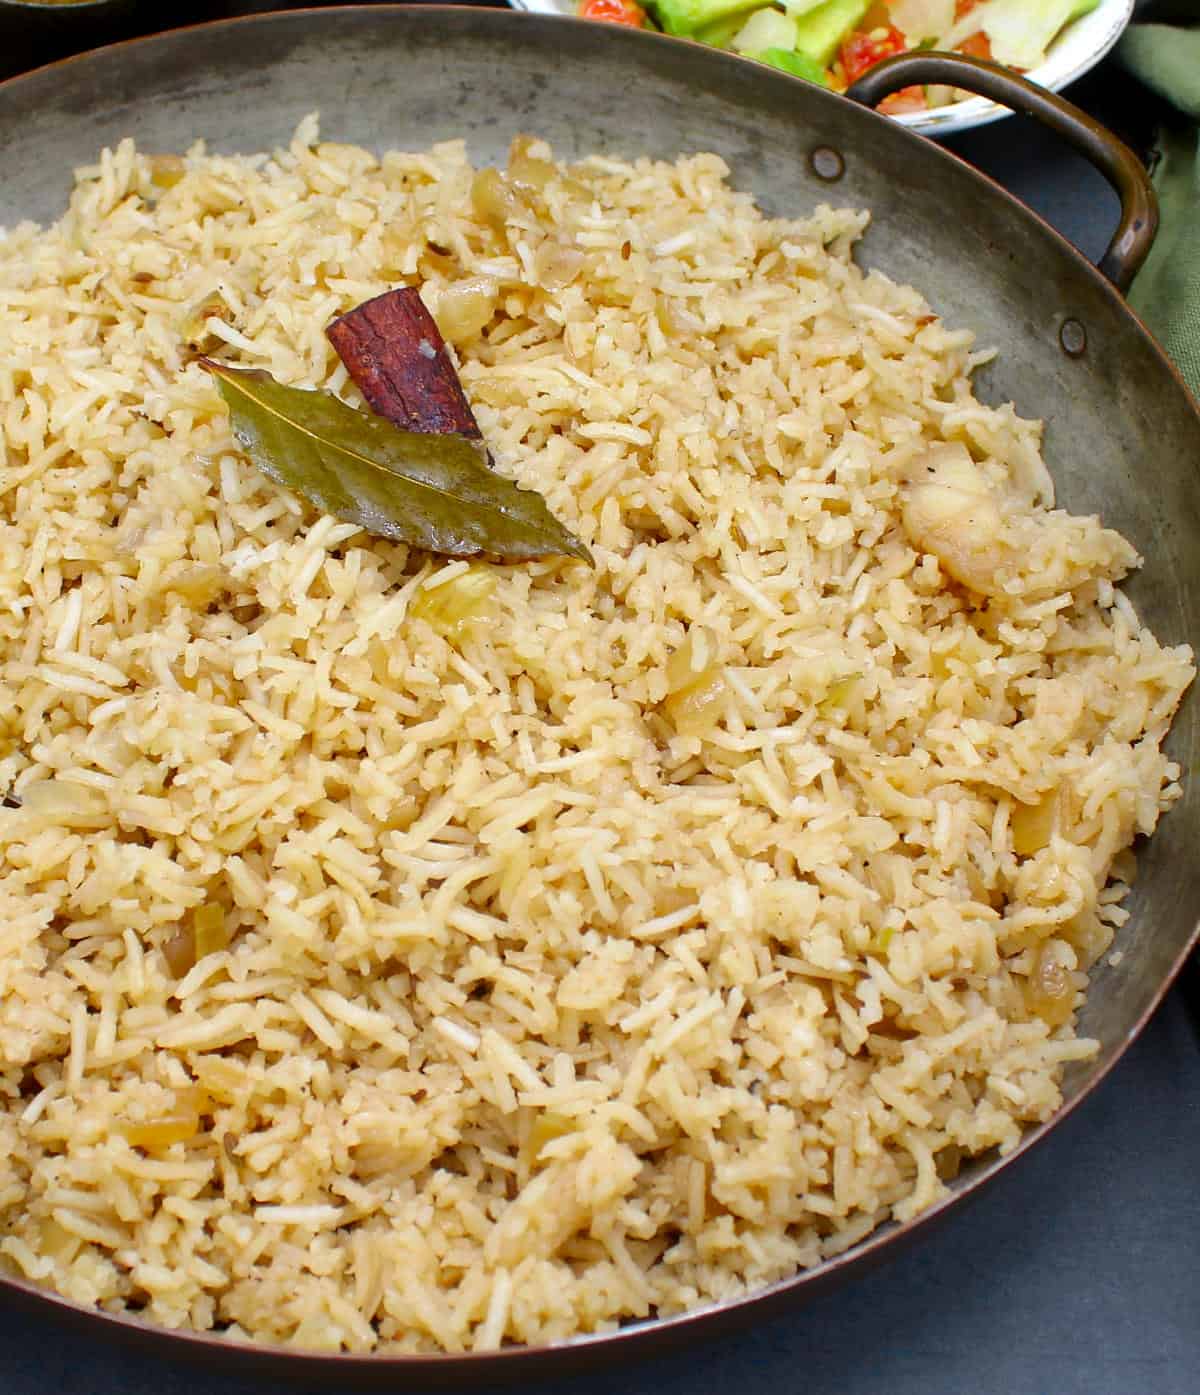 Parsi brown rice in a copper serving pan with a bay leaf and cinnamon stick.